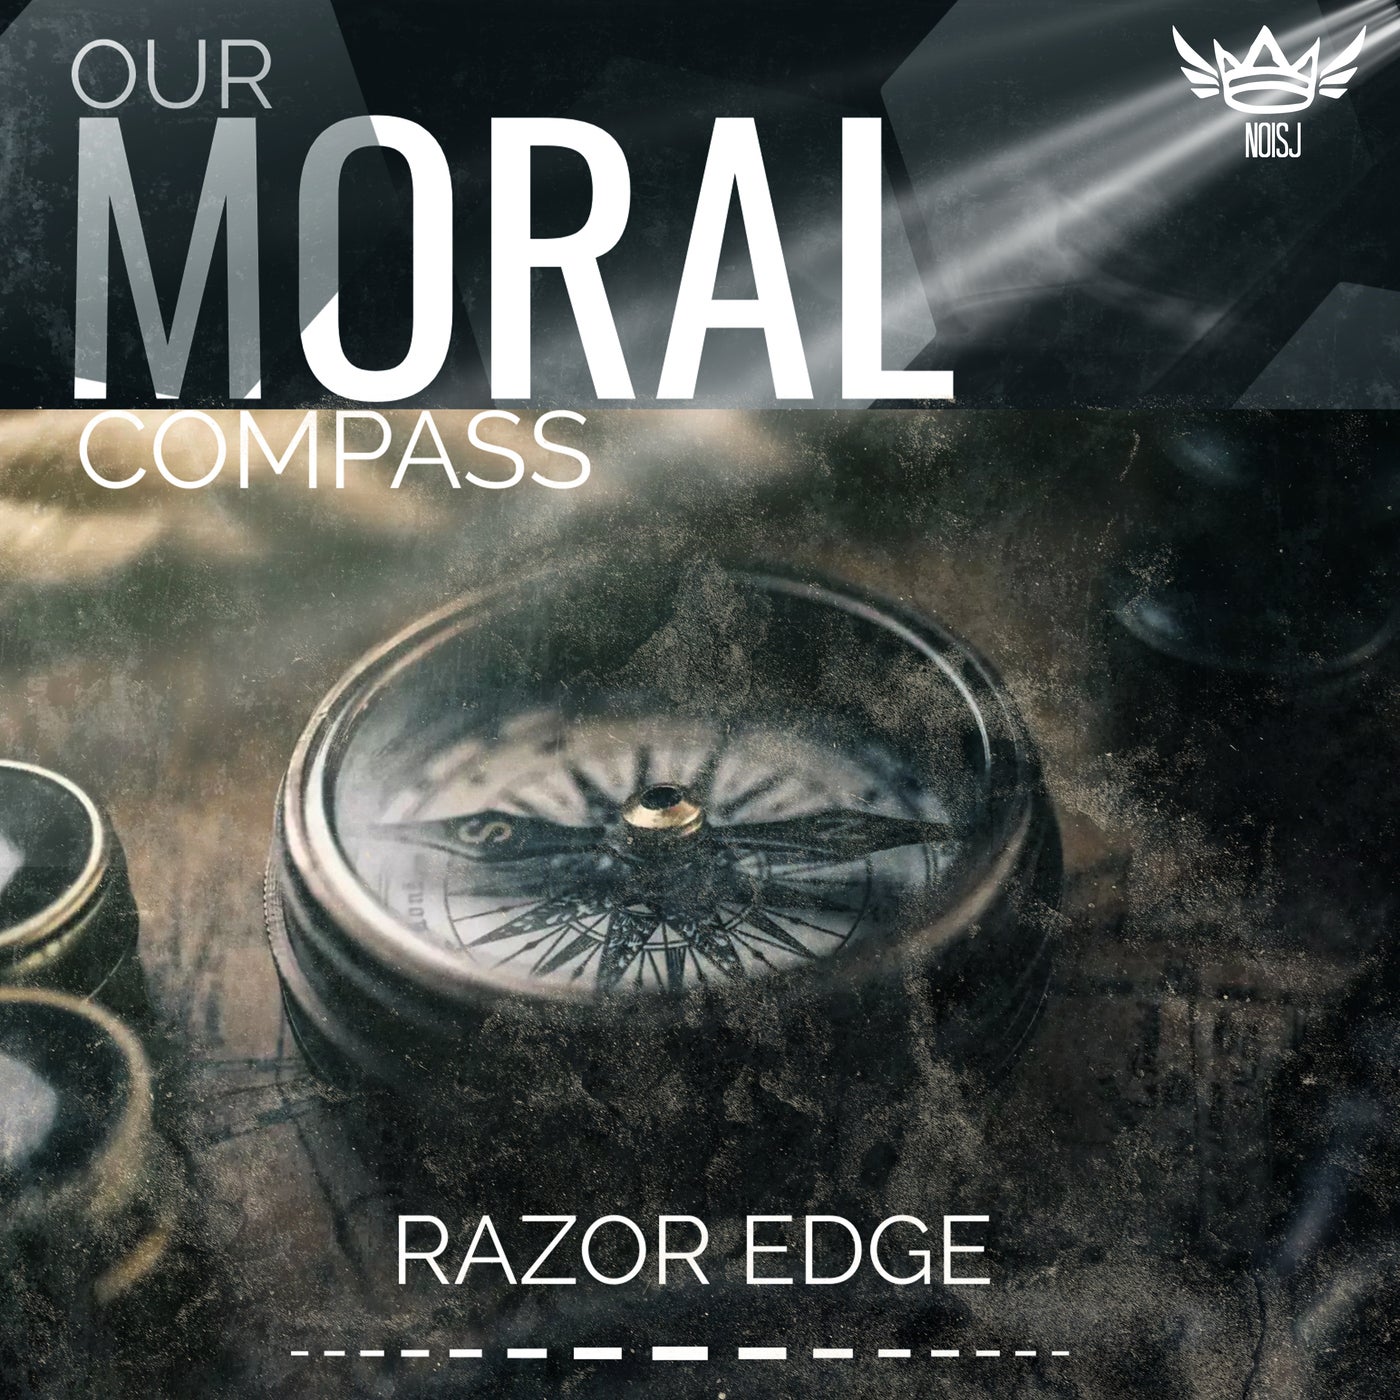 Our Moral Compass